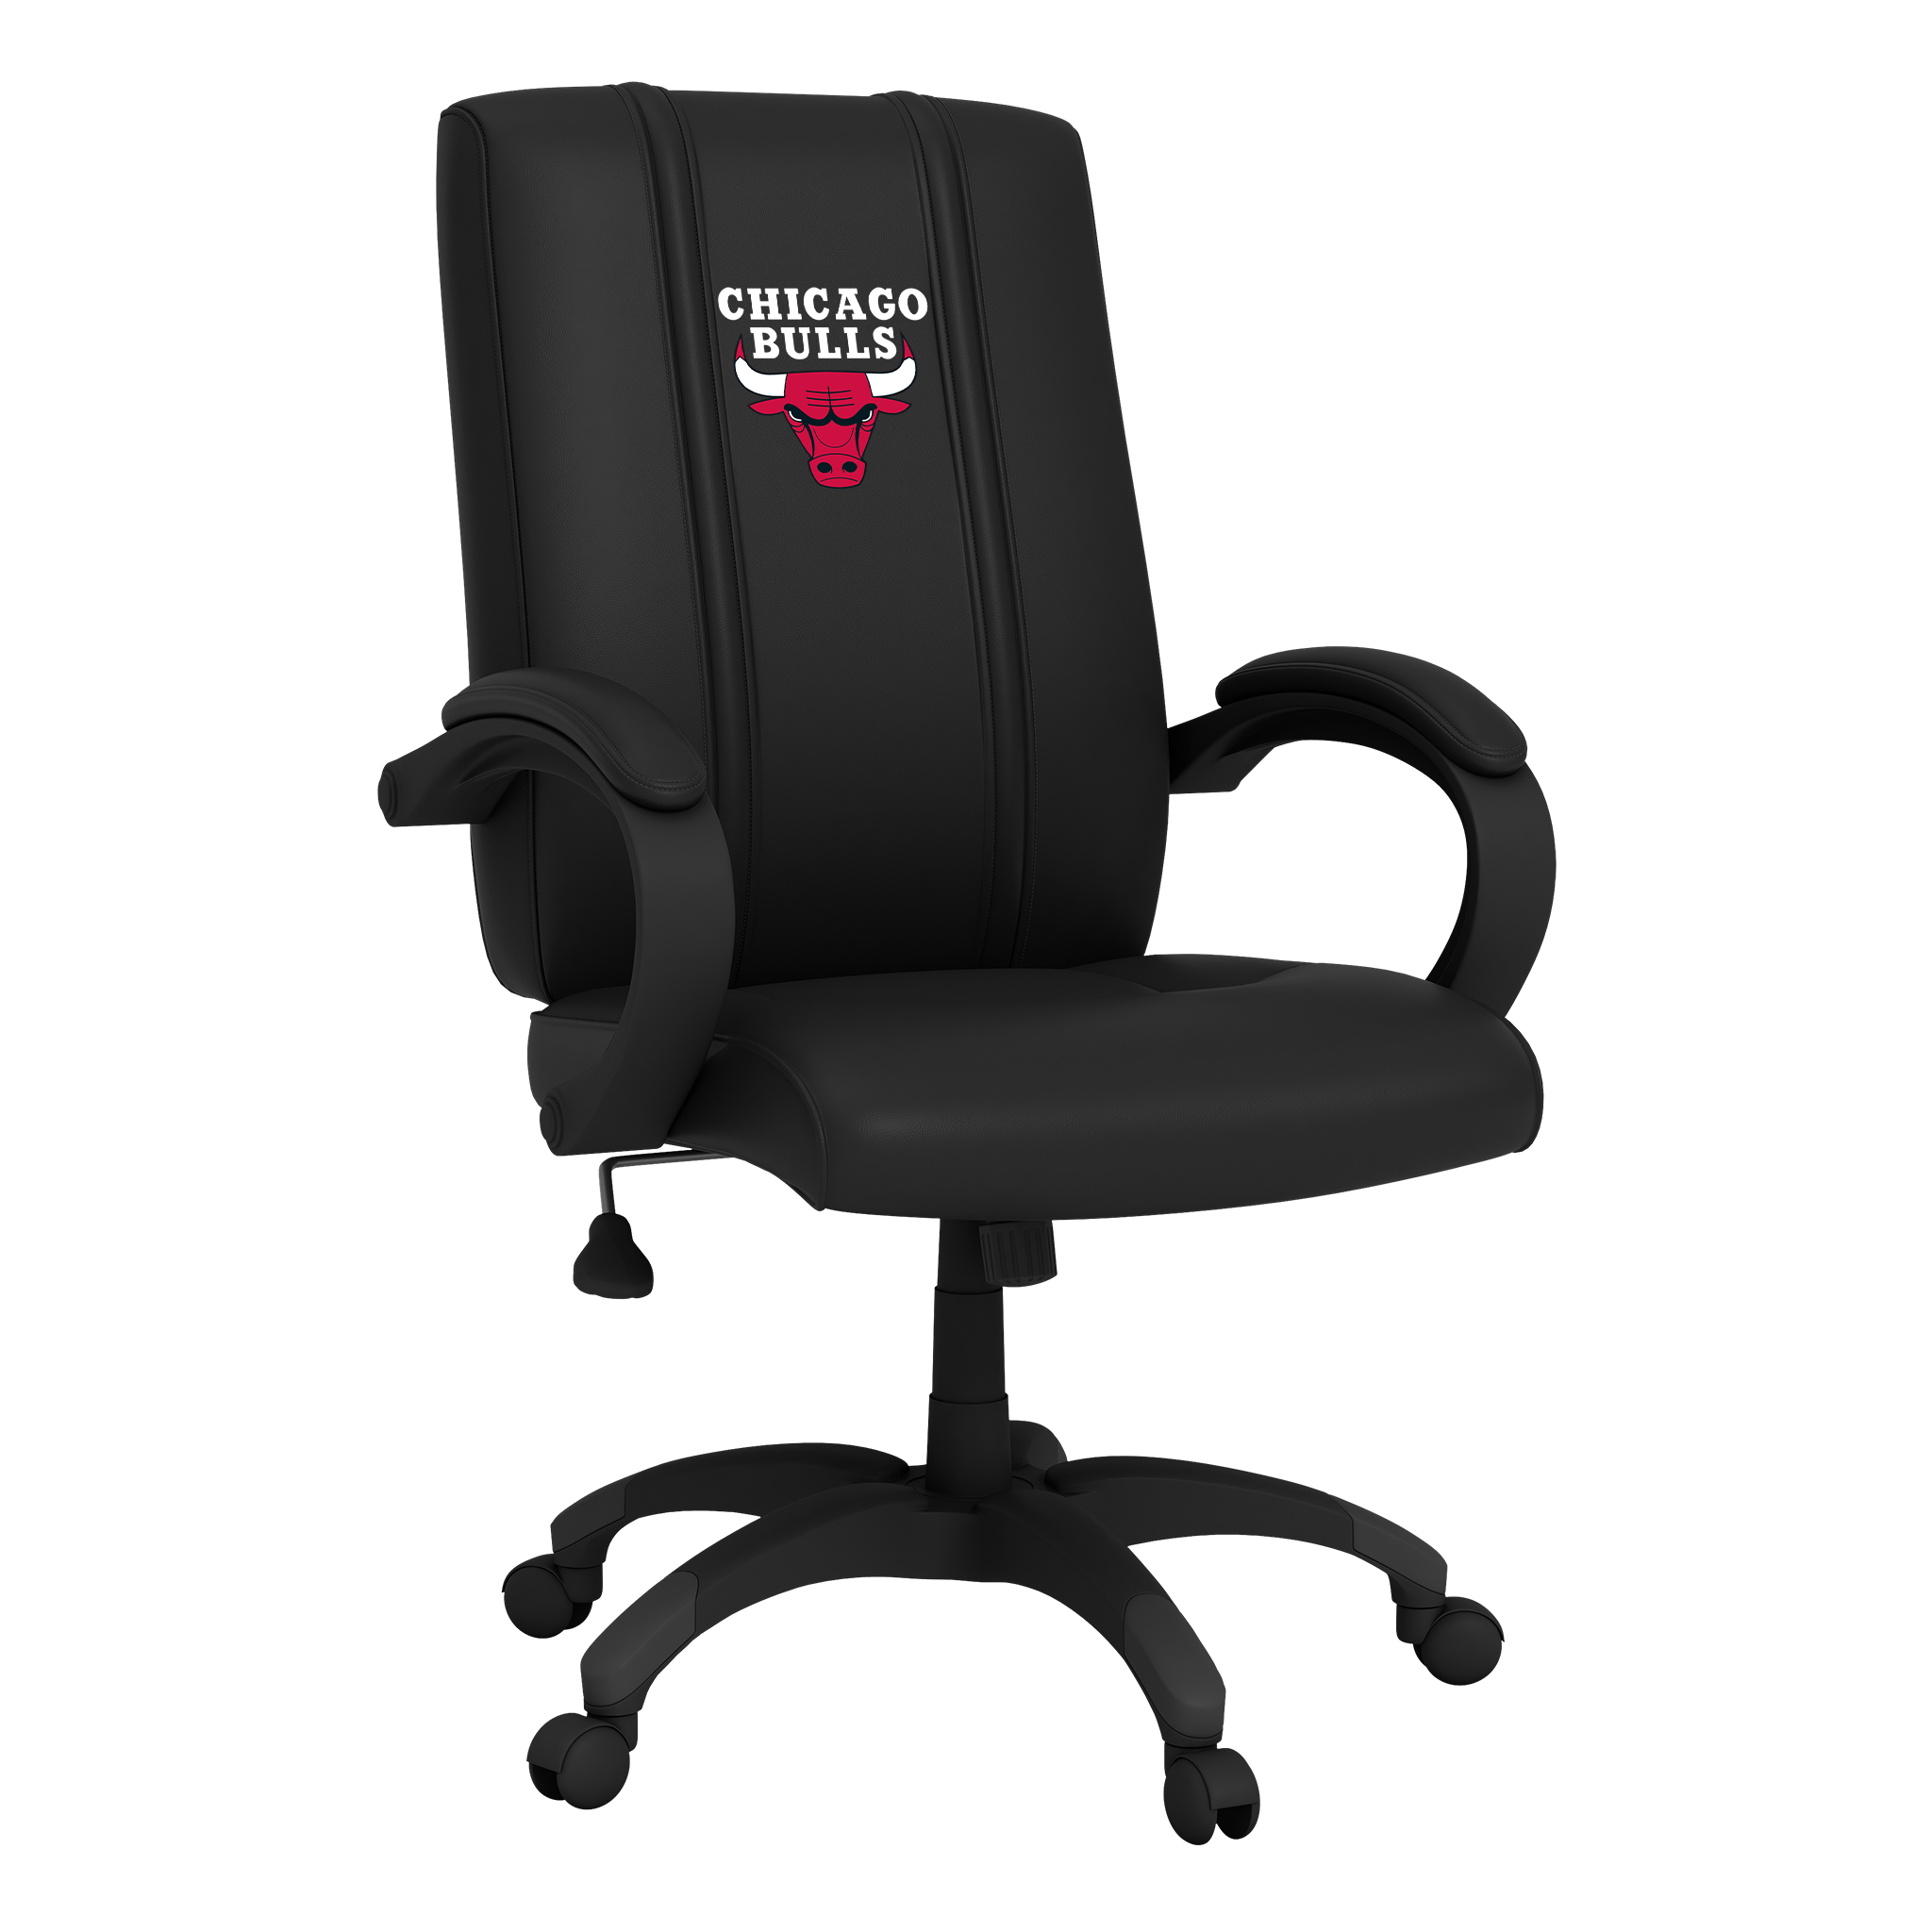 Chicago Bulls Office Chair 1000 with Chicago Bulls Logo